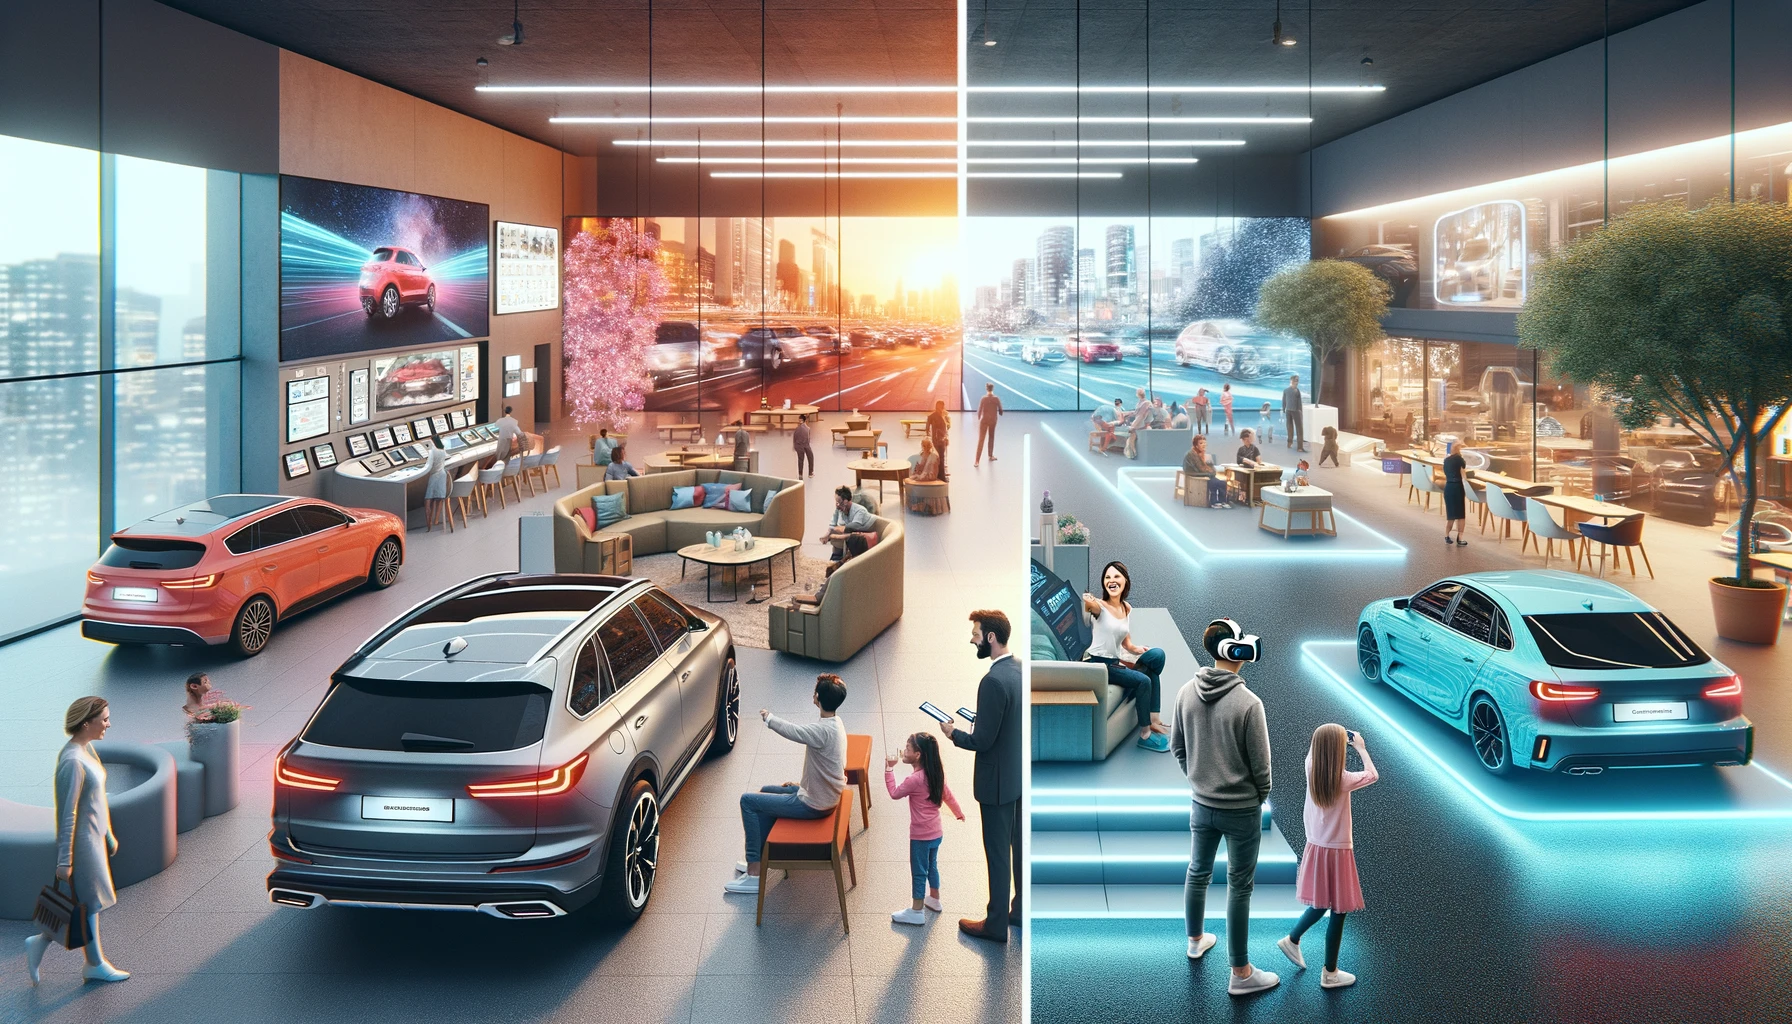 Split-screen image: Left, a traditional car showroom with a lone customer. Right, an interactive dealership with VR test drives, touch-screen displays, cafes, and family areas.